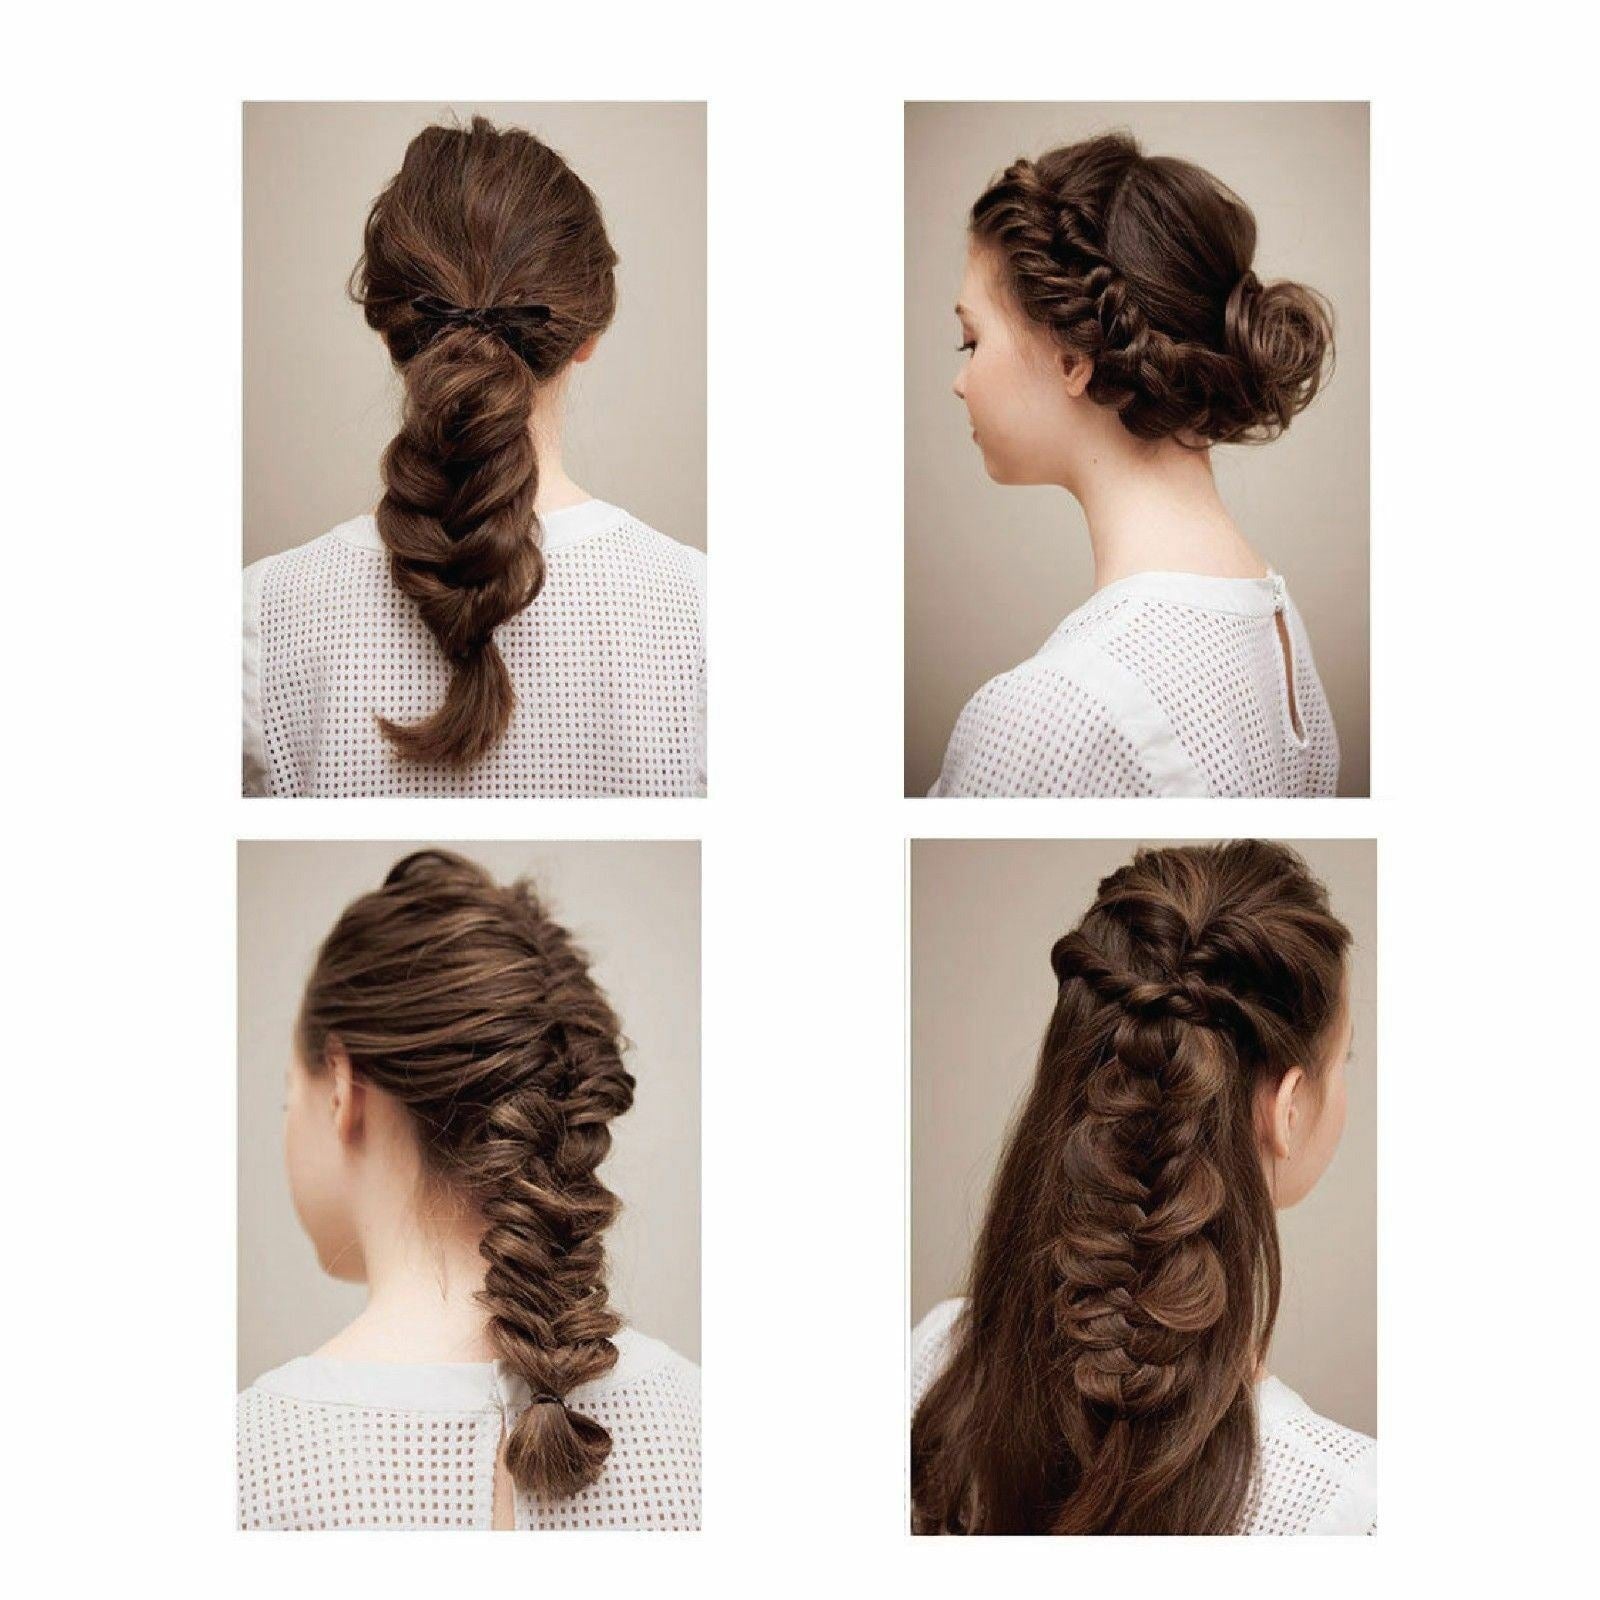 differently styled hair using Hair Braiding Tool